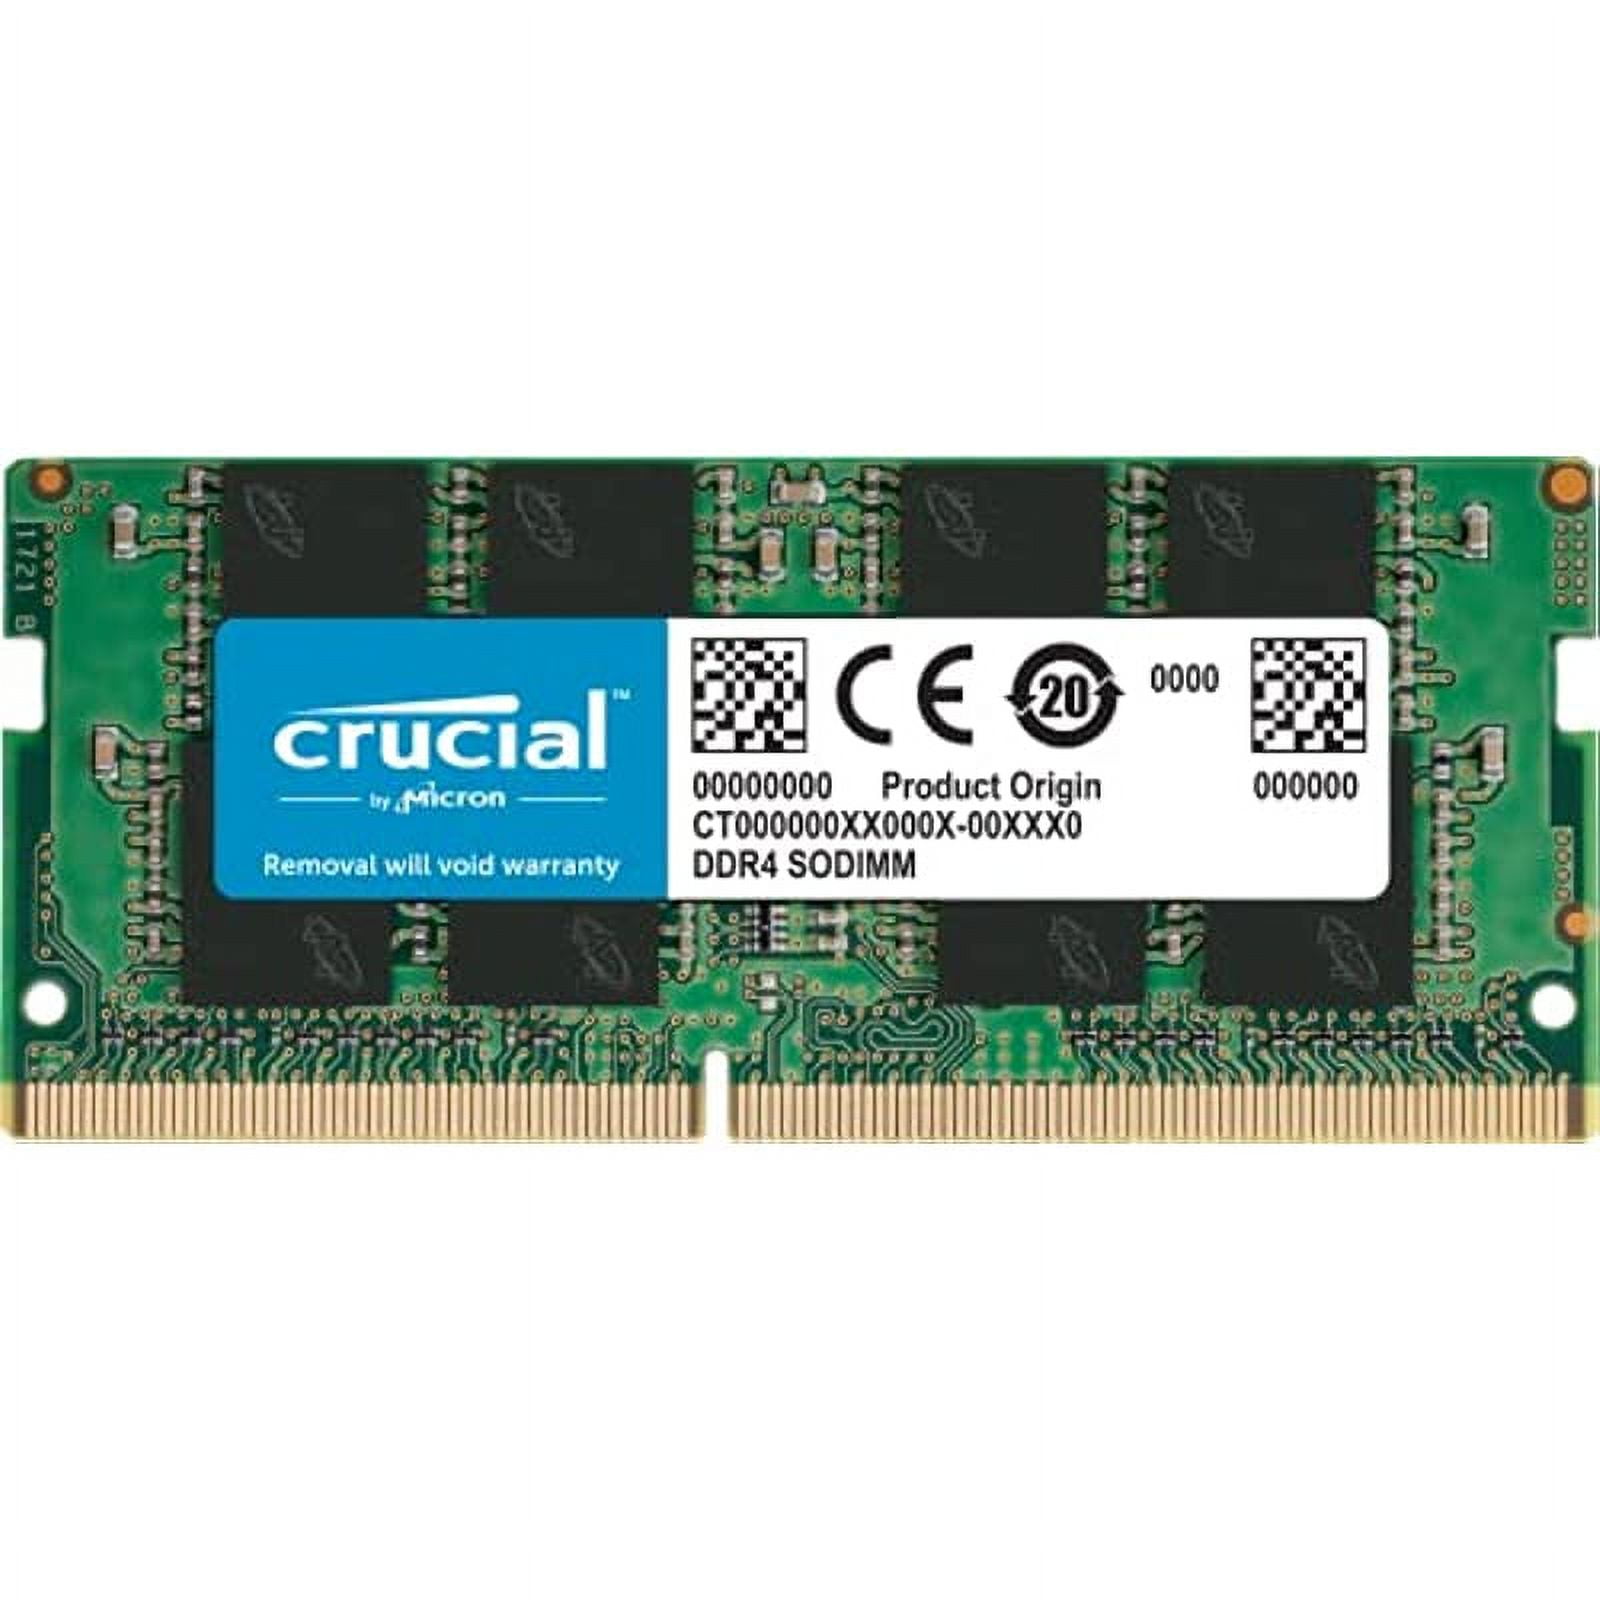 Crucial RAM 32GB Kit (16GBx2) DDR4 3200MHz CL22 (or 2933MHz or 2666MHz)  Desktop Memory CT2K16G4DFD832A at